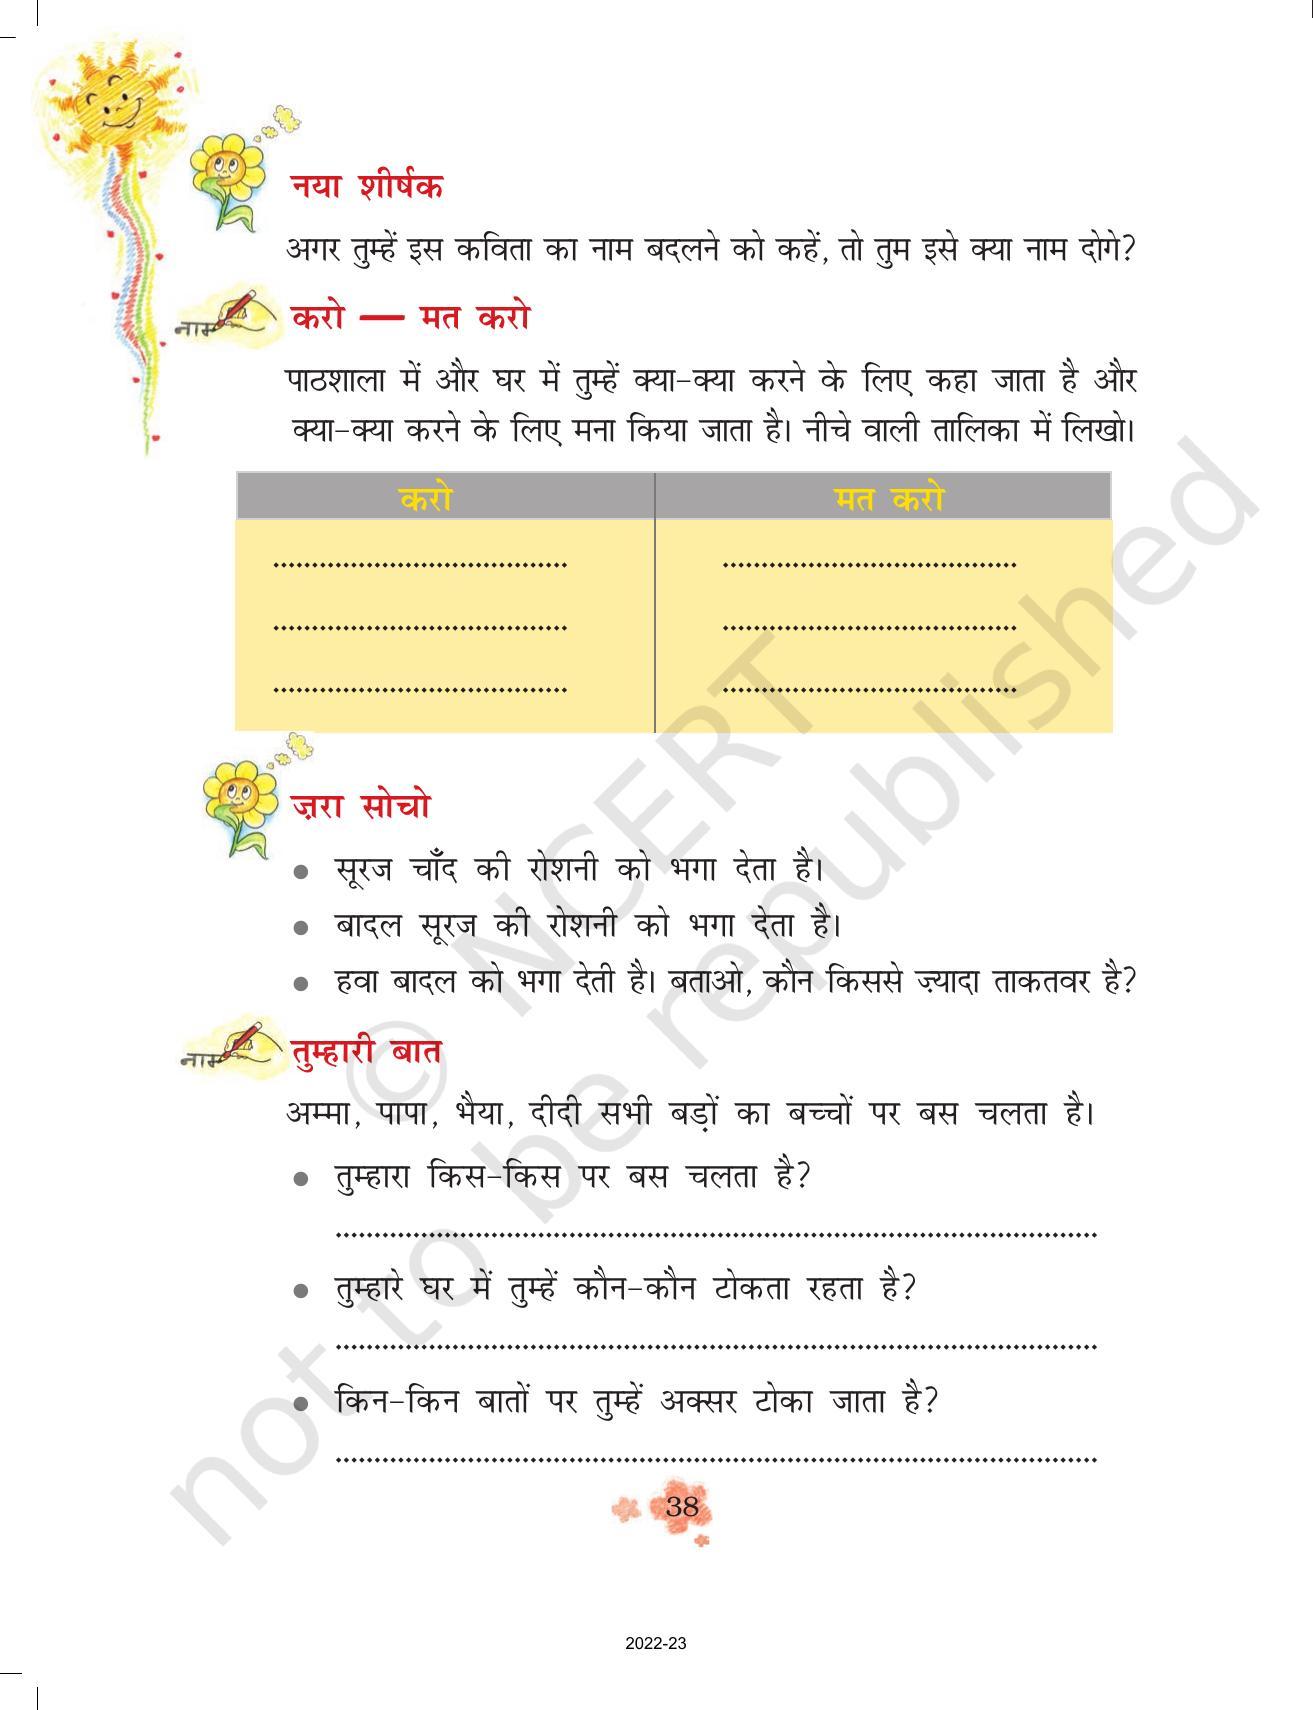 NCERT Book for Class 3 Hindi Chapter 5-हमसे सब कहते - Page 3